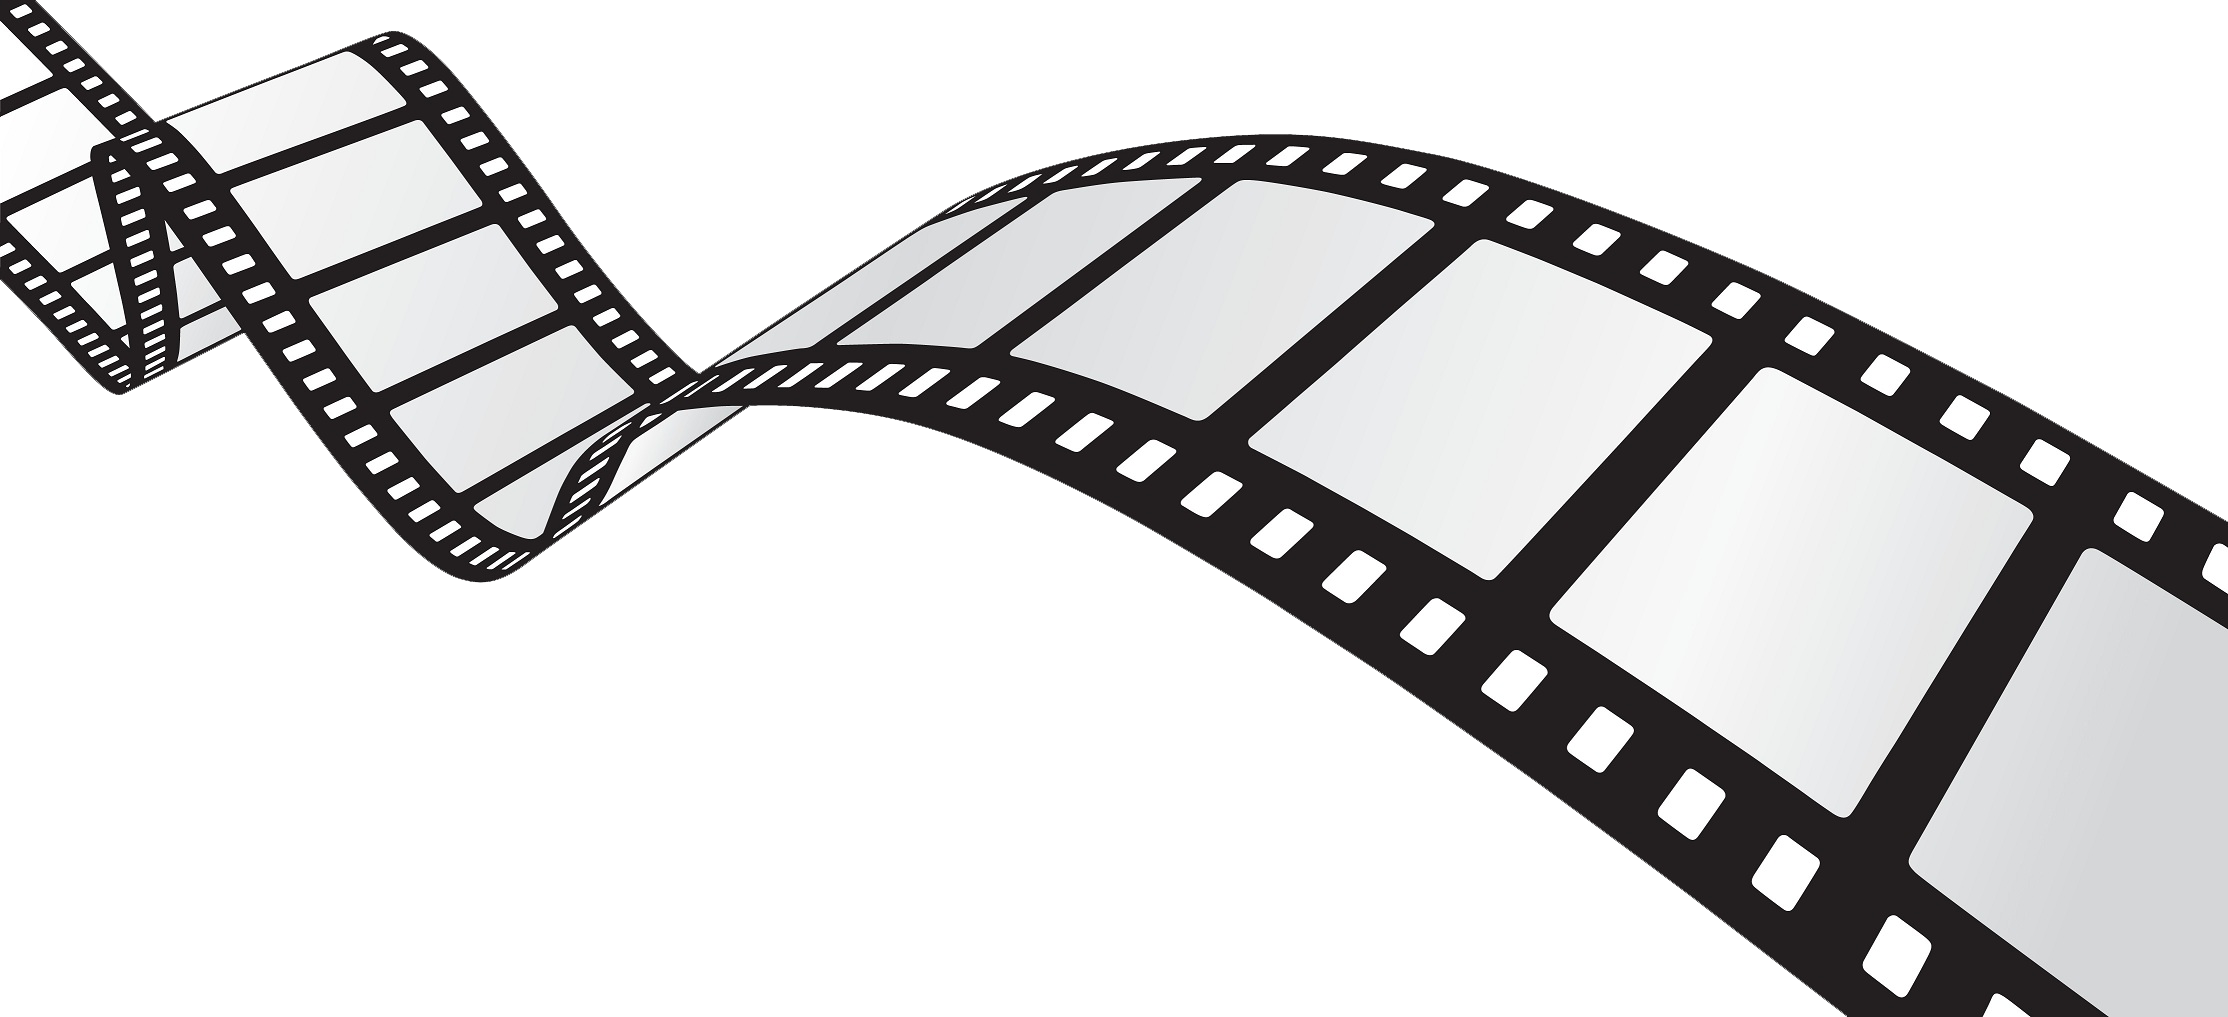 clipart for movie maker - photo #16